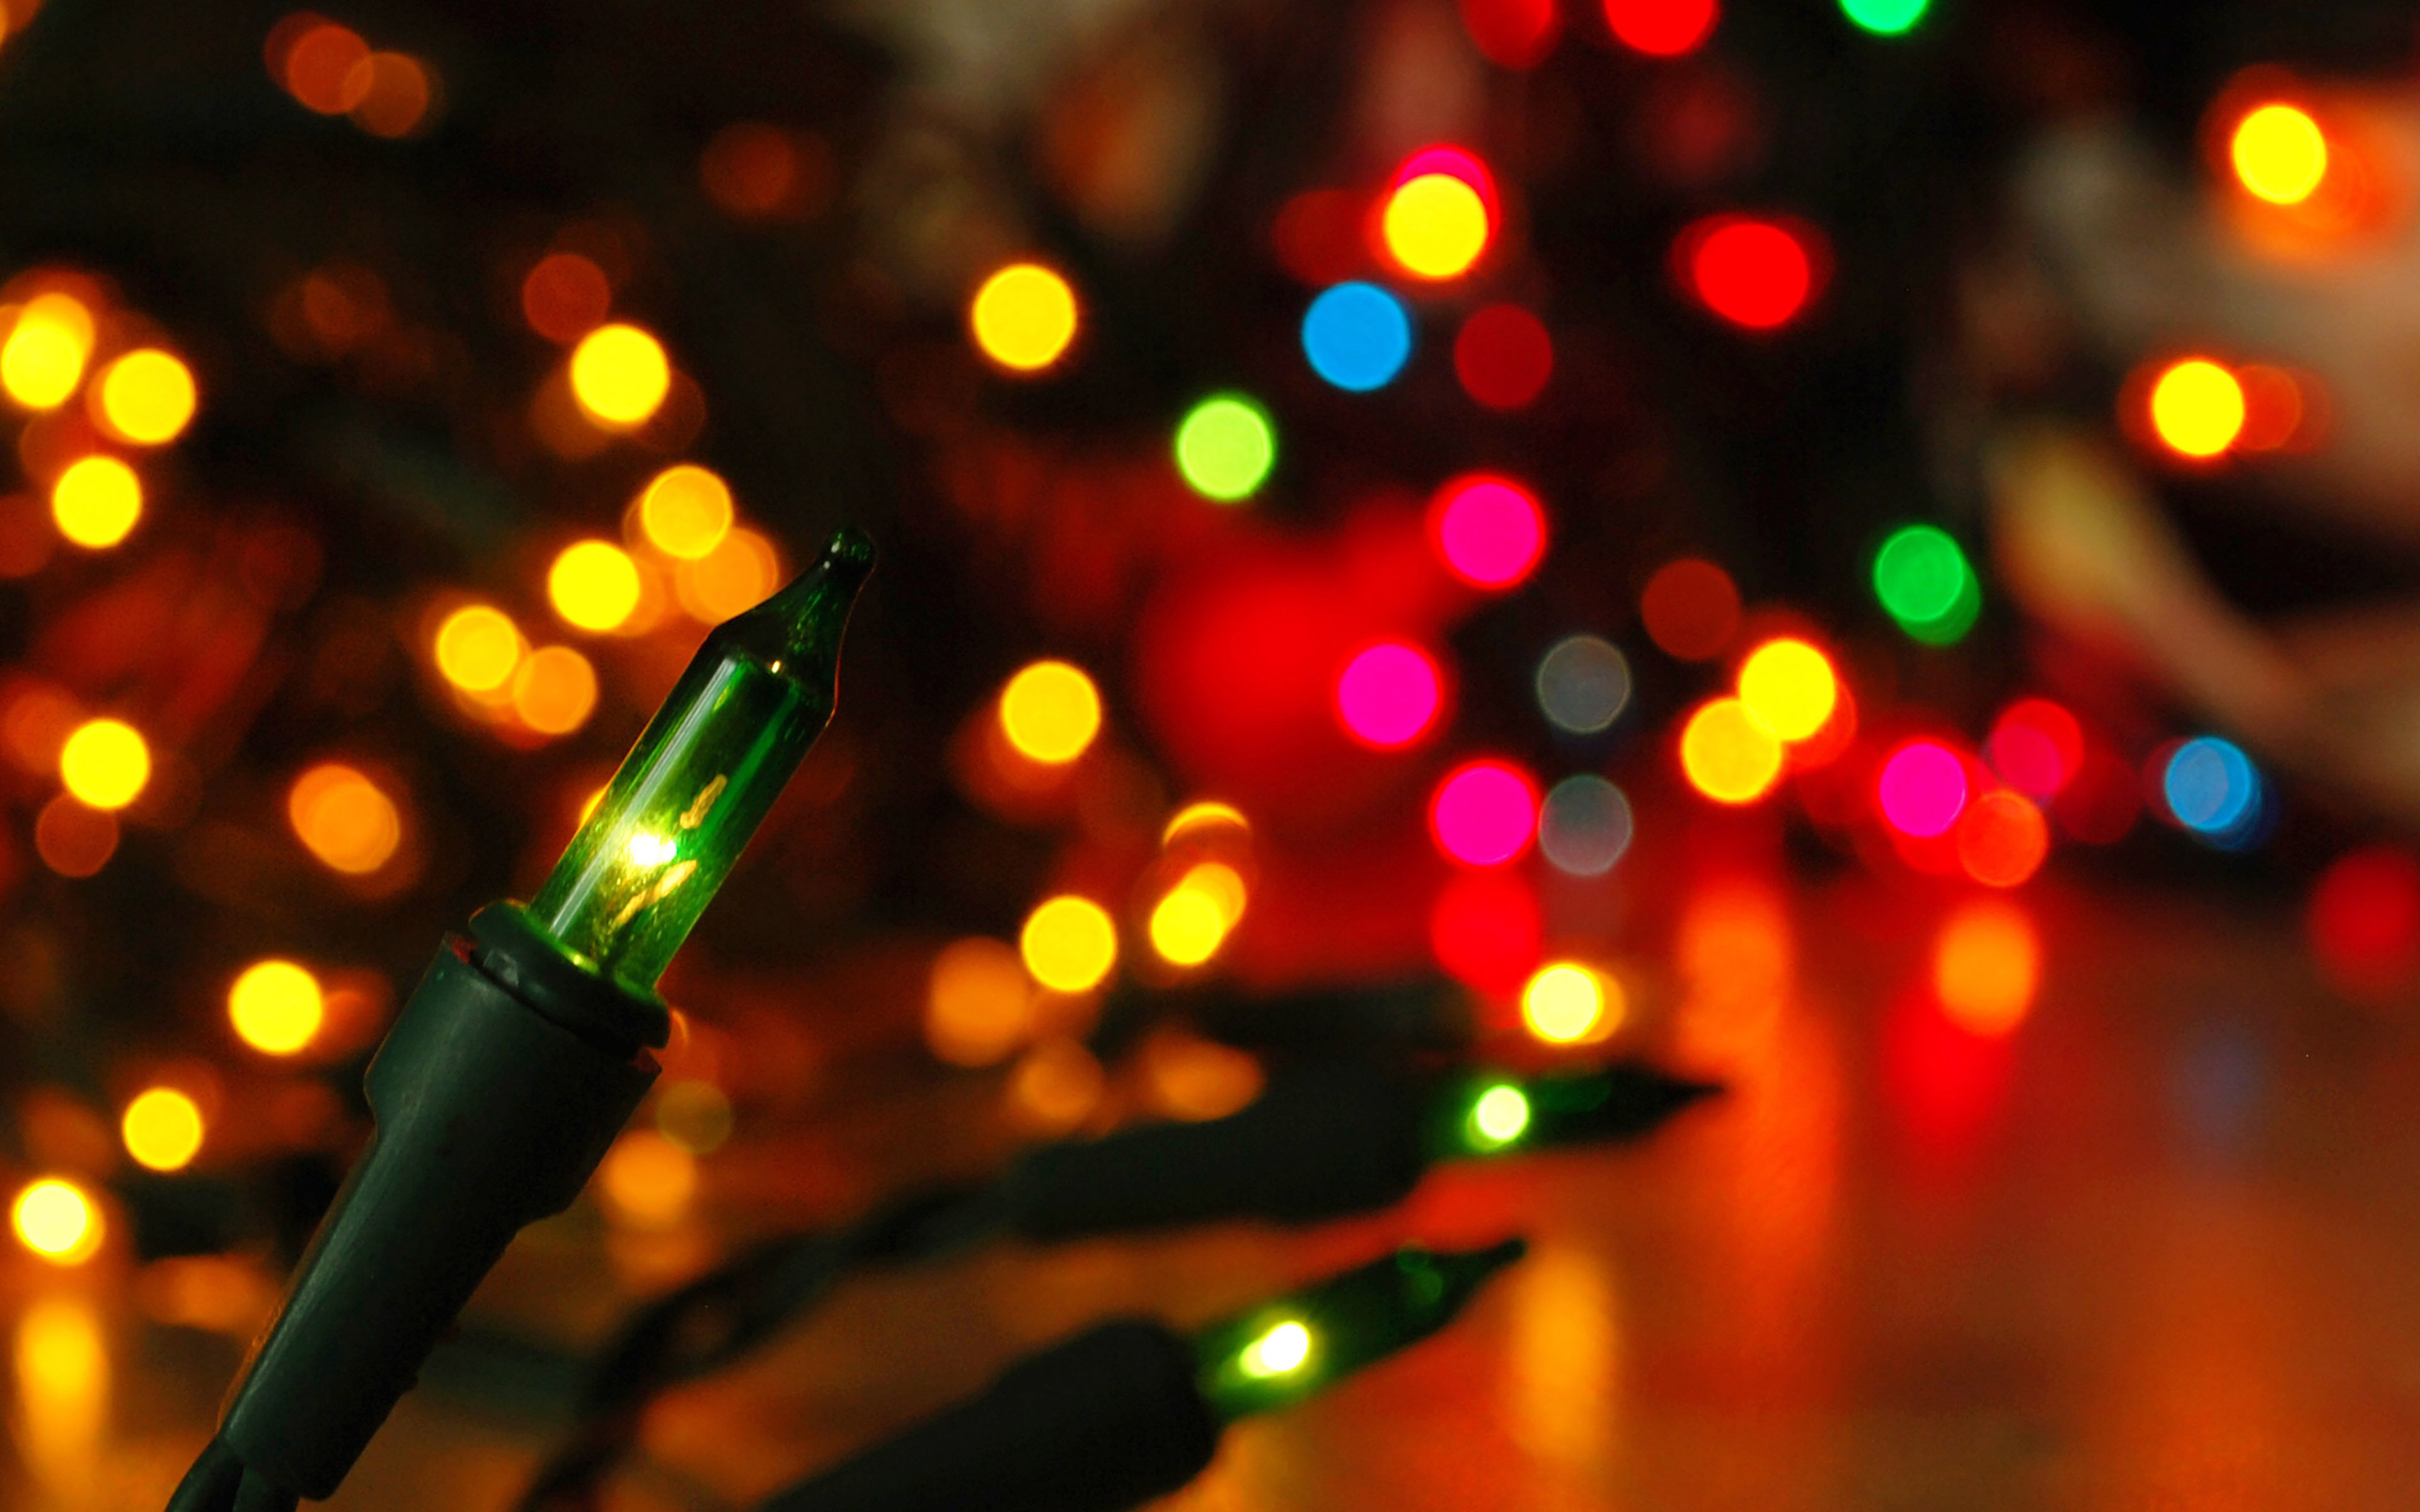 A string of Christmas lights with a focus on the green bulb. - Christmas lights